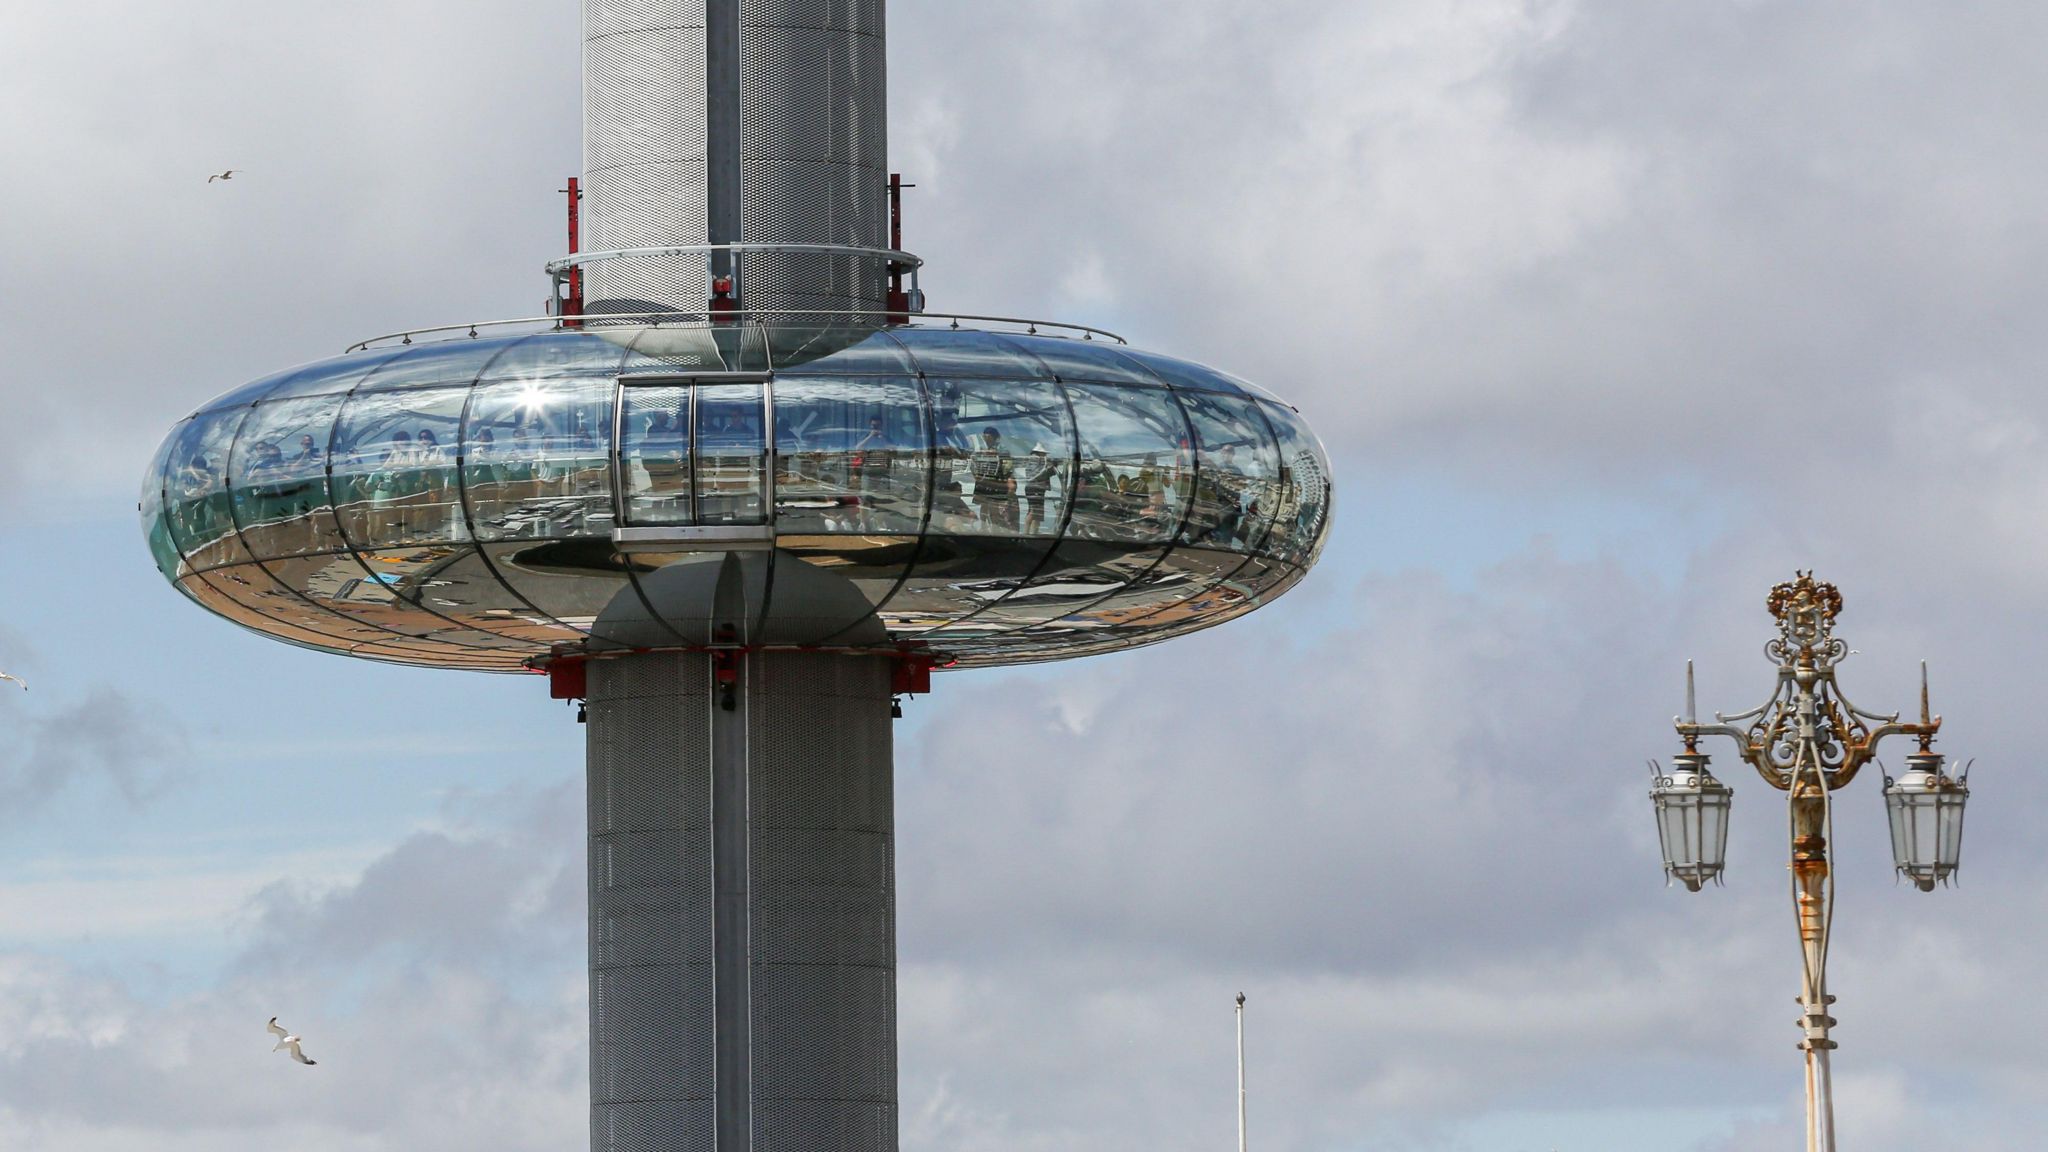 View of The British Airways i360 observation tower on the Brighton seafront